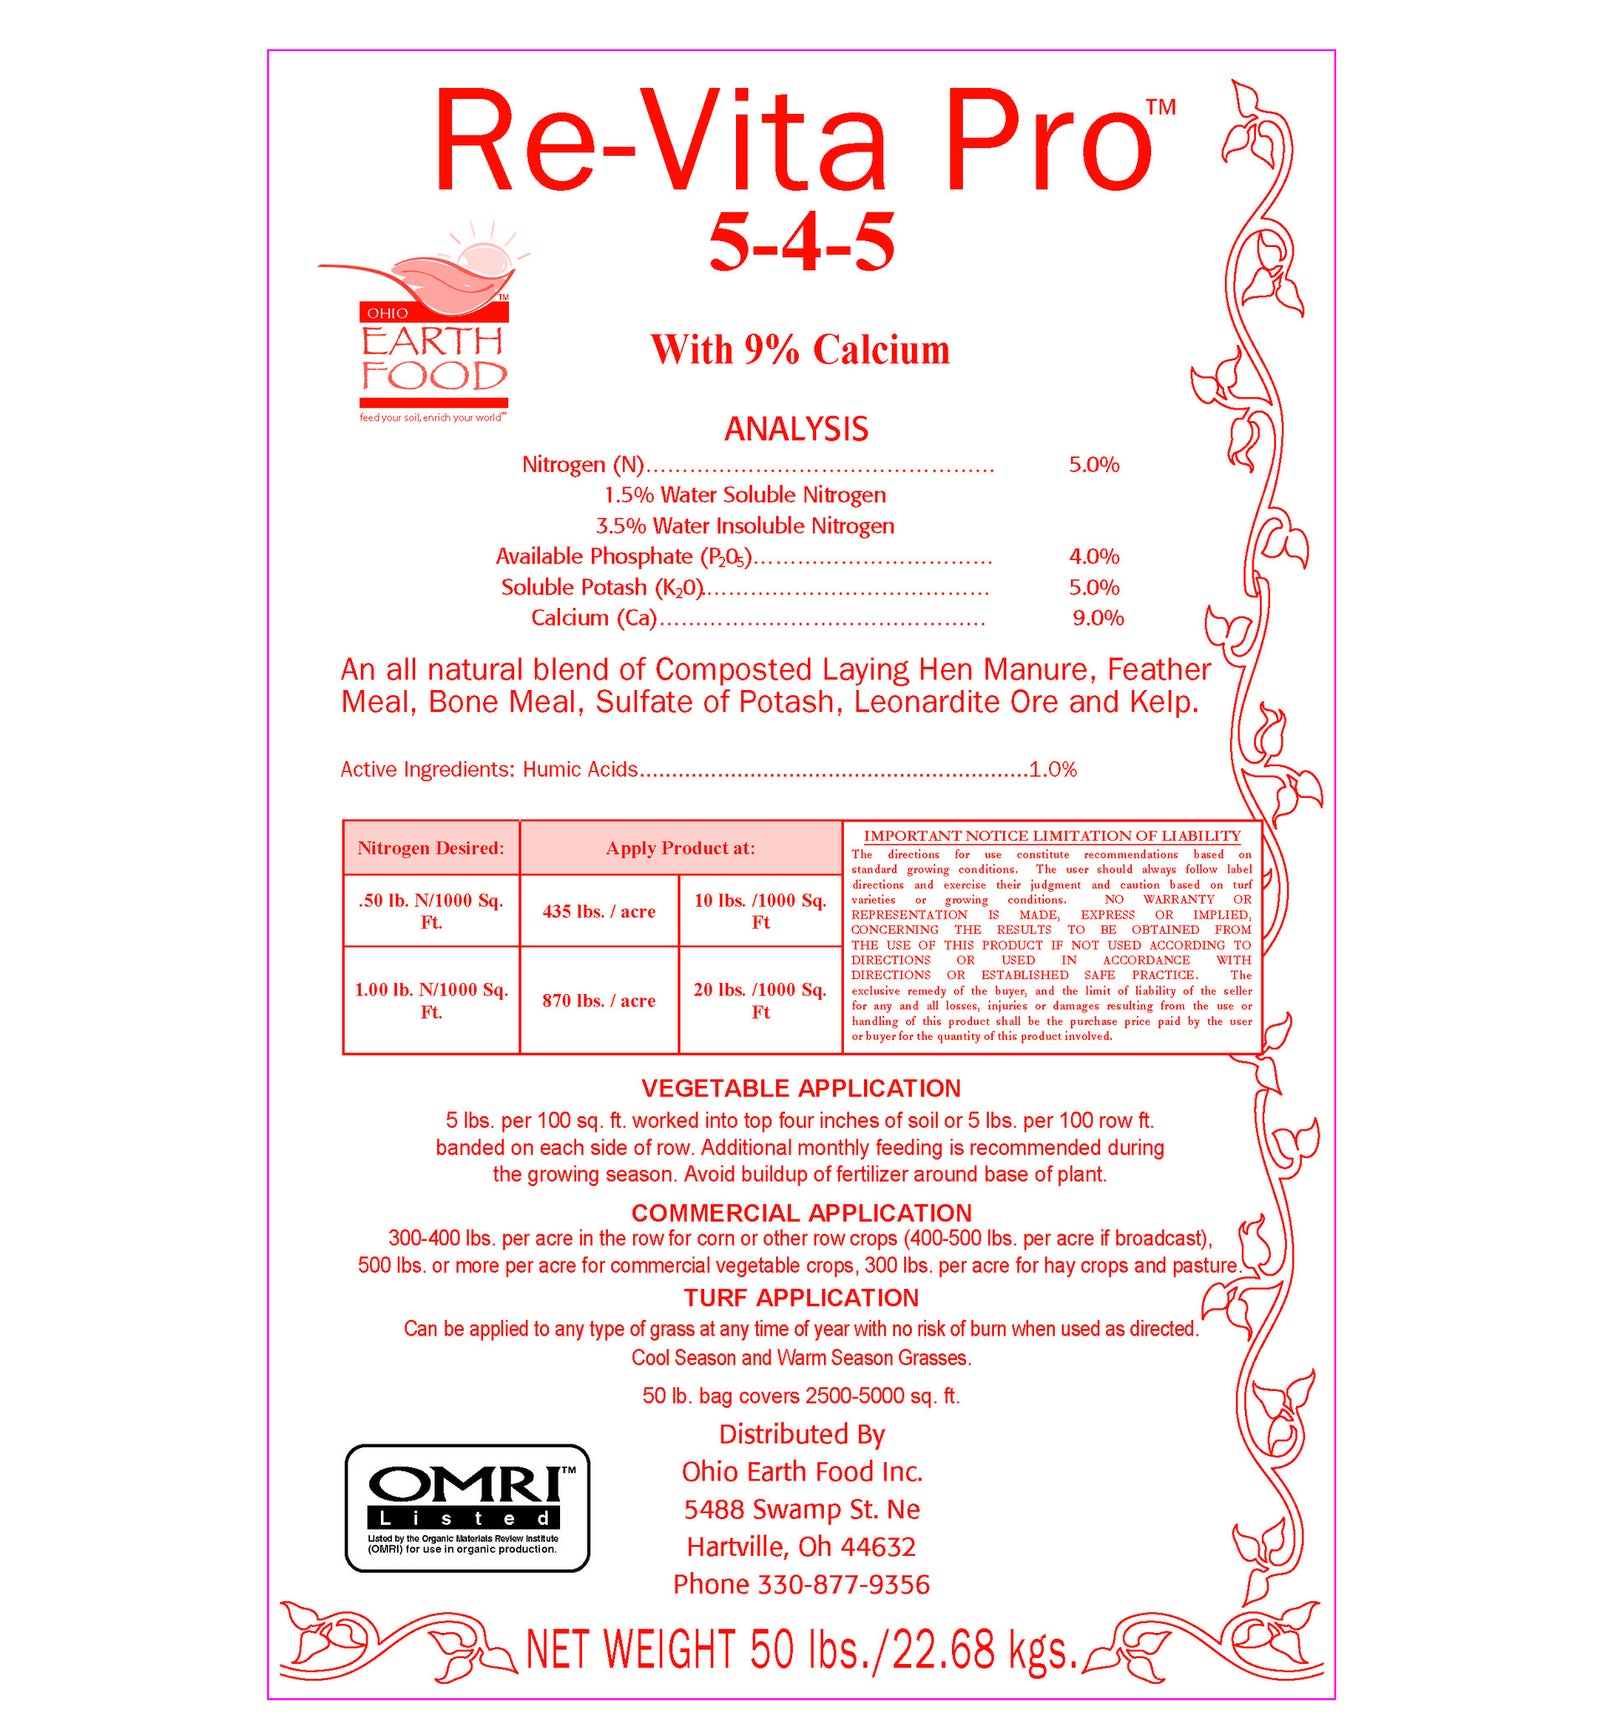 #1 For Commercial Growers Re-Vita Pro (5-4-5) 50# bag OMRI listed